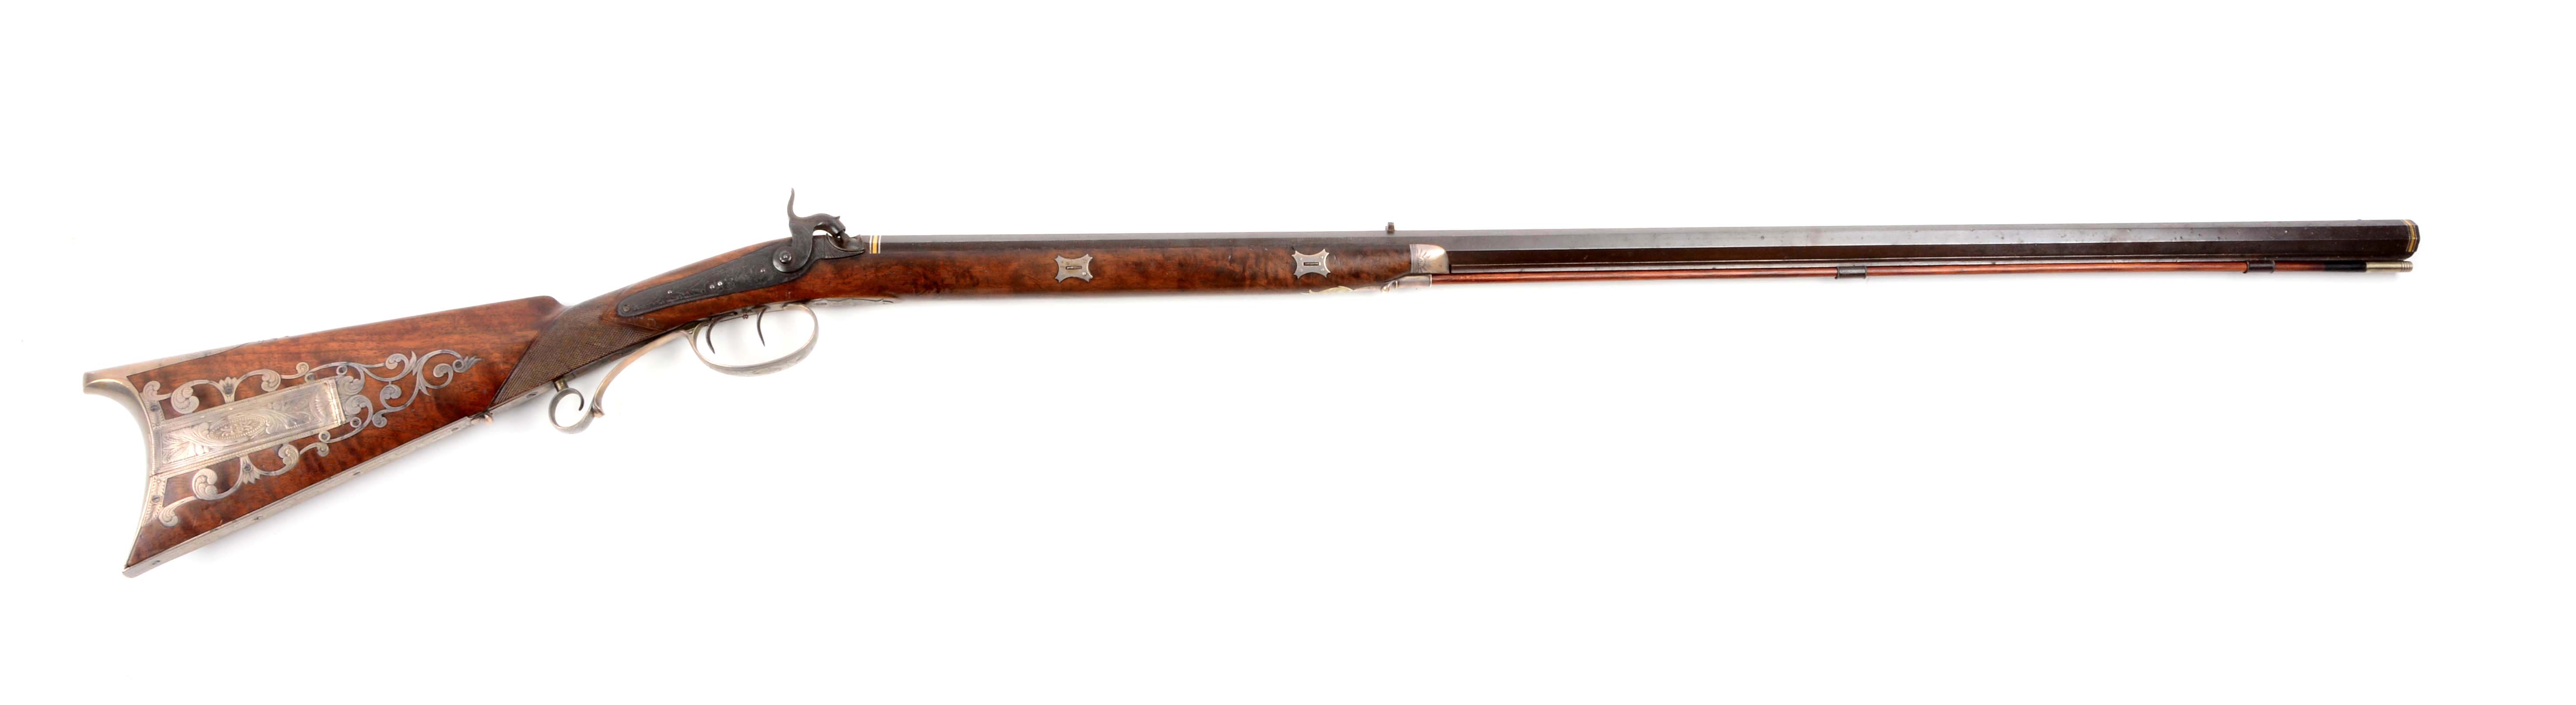 Silver Mounted Rifle Signed by Daniel Searles, estimated at $30,000-50,000.